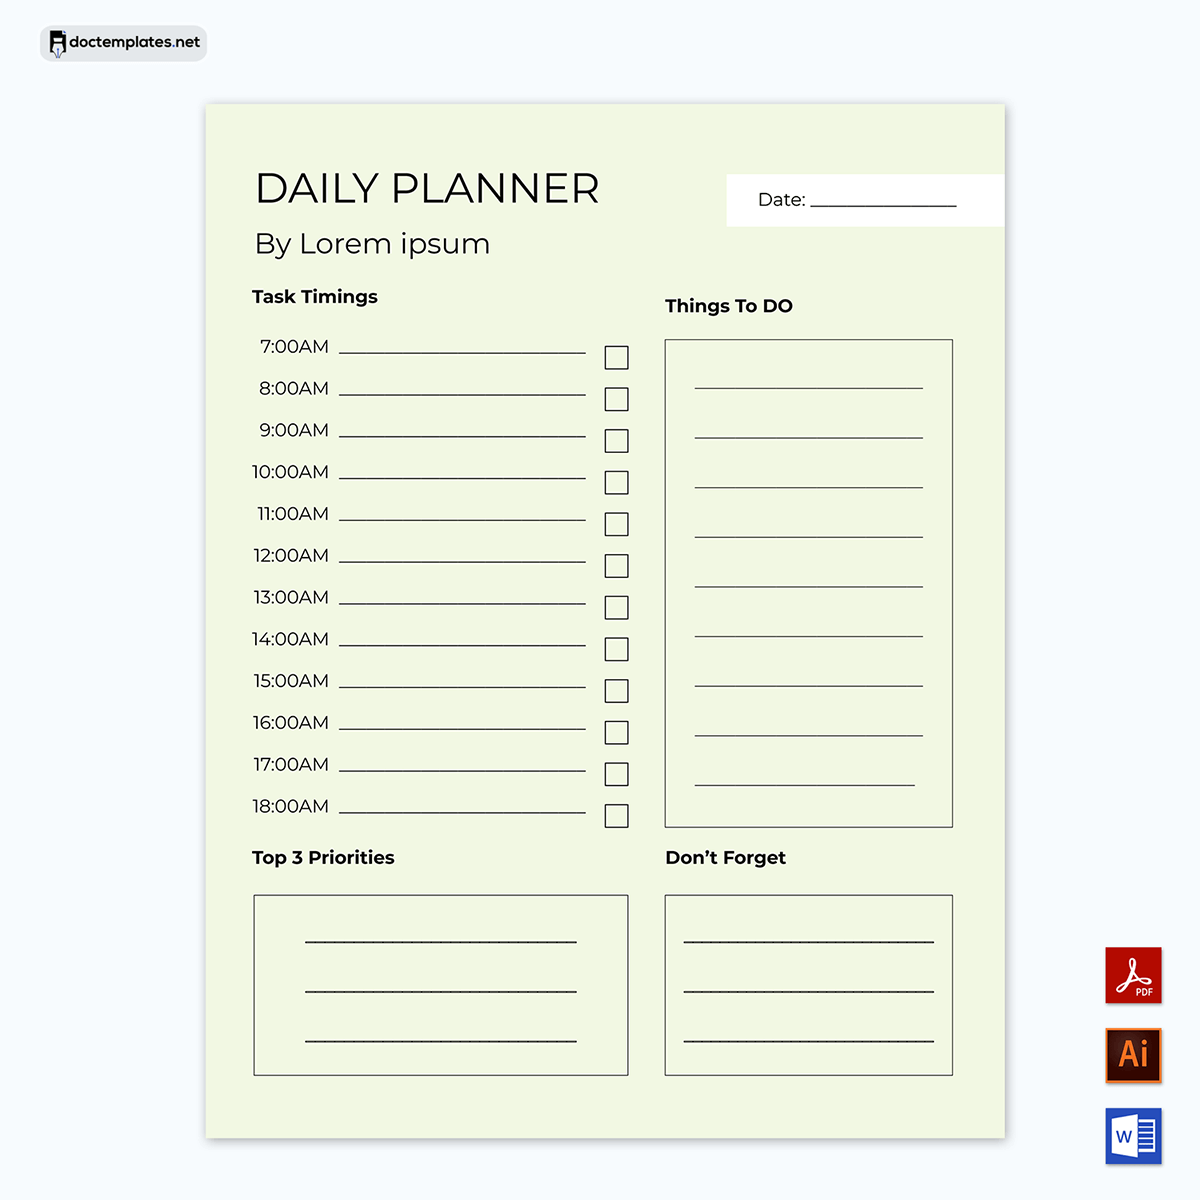 Personalized Daily Planner Template